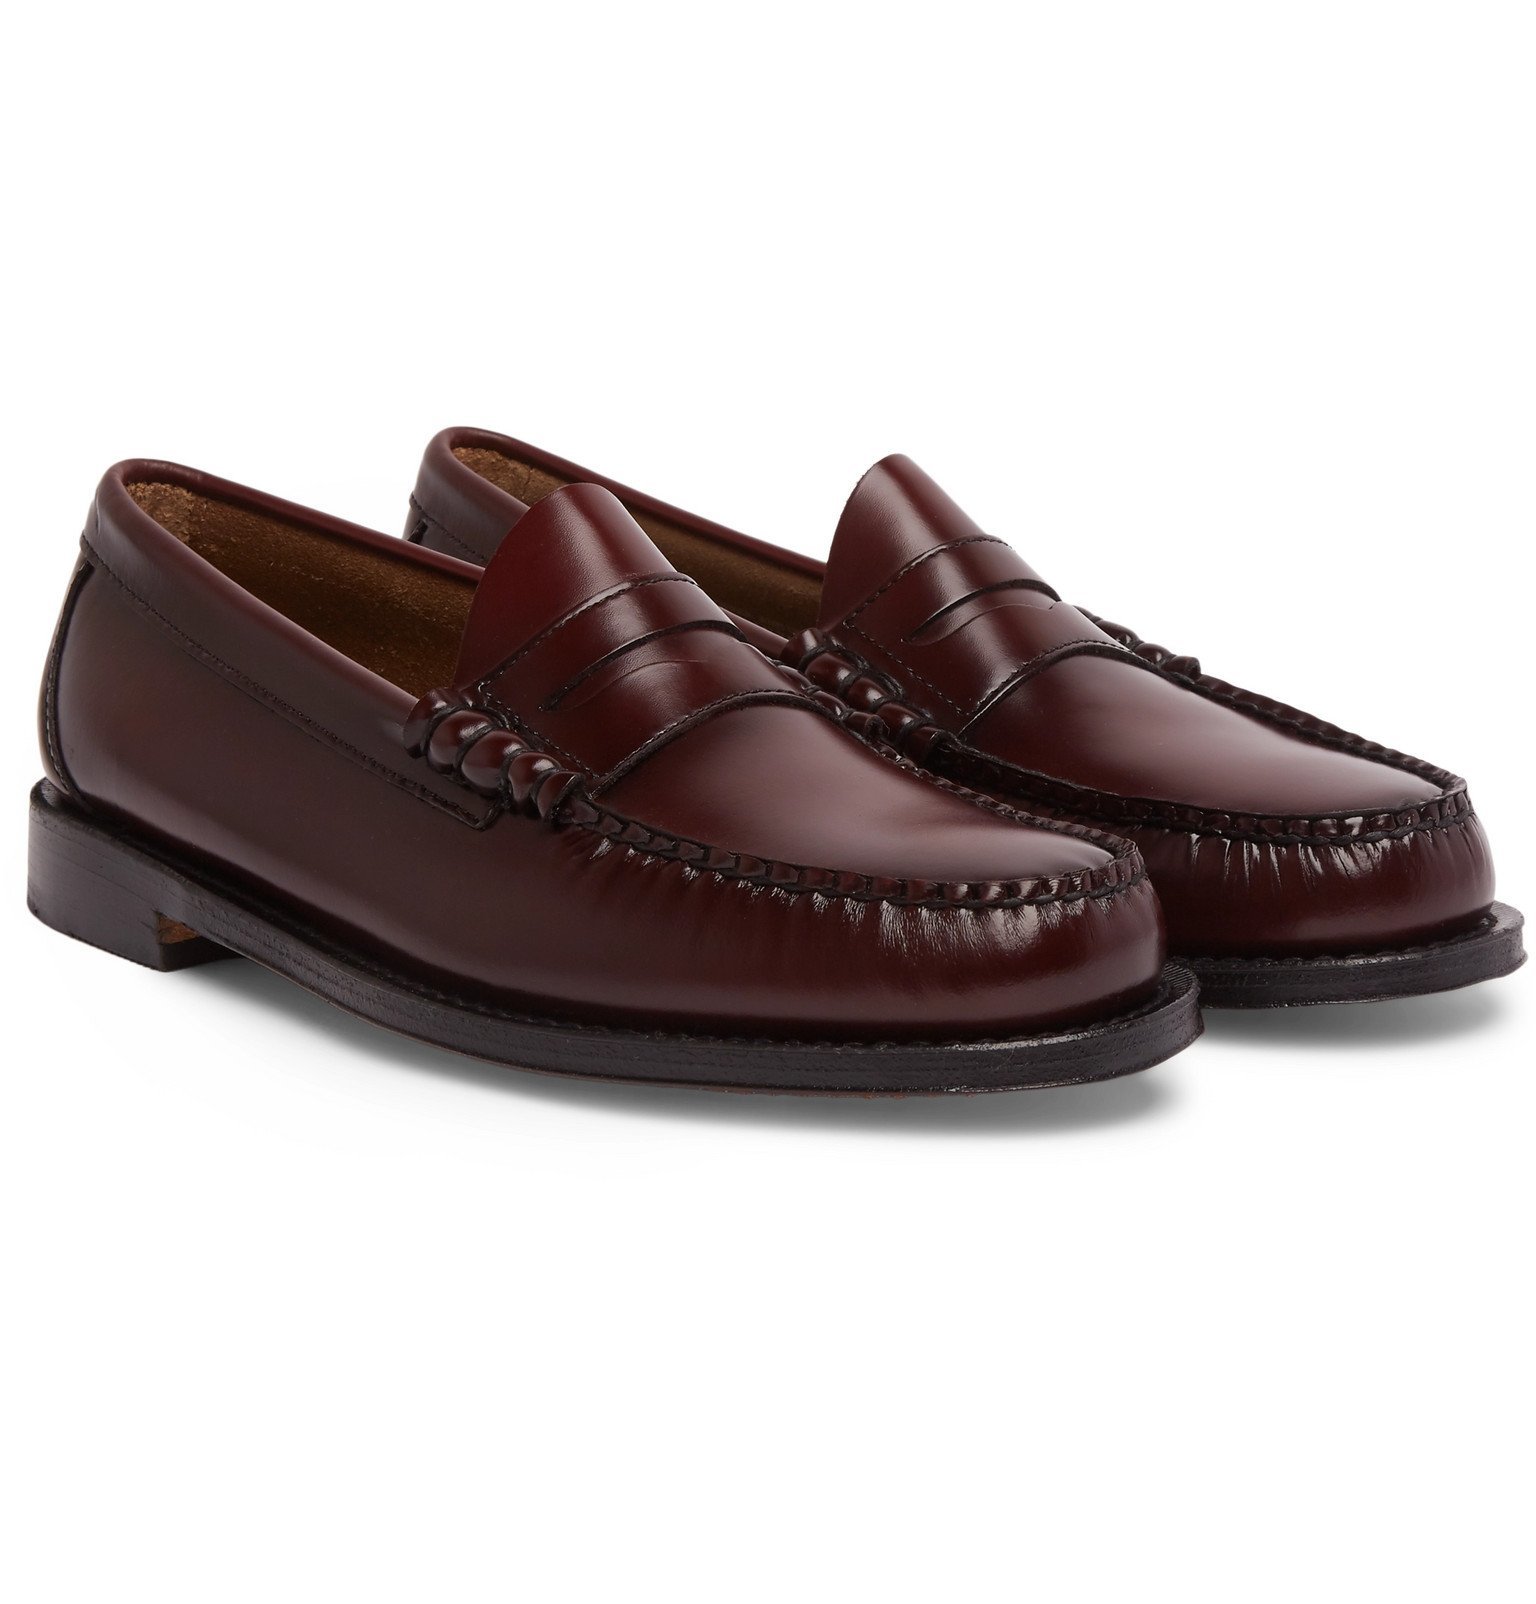 G.H. Bass & Co. - Weejuns Larson Leather Penny Loafers - Burgundy G.H ...